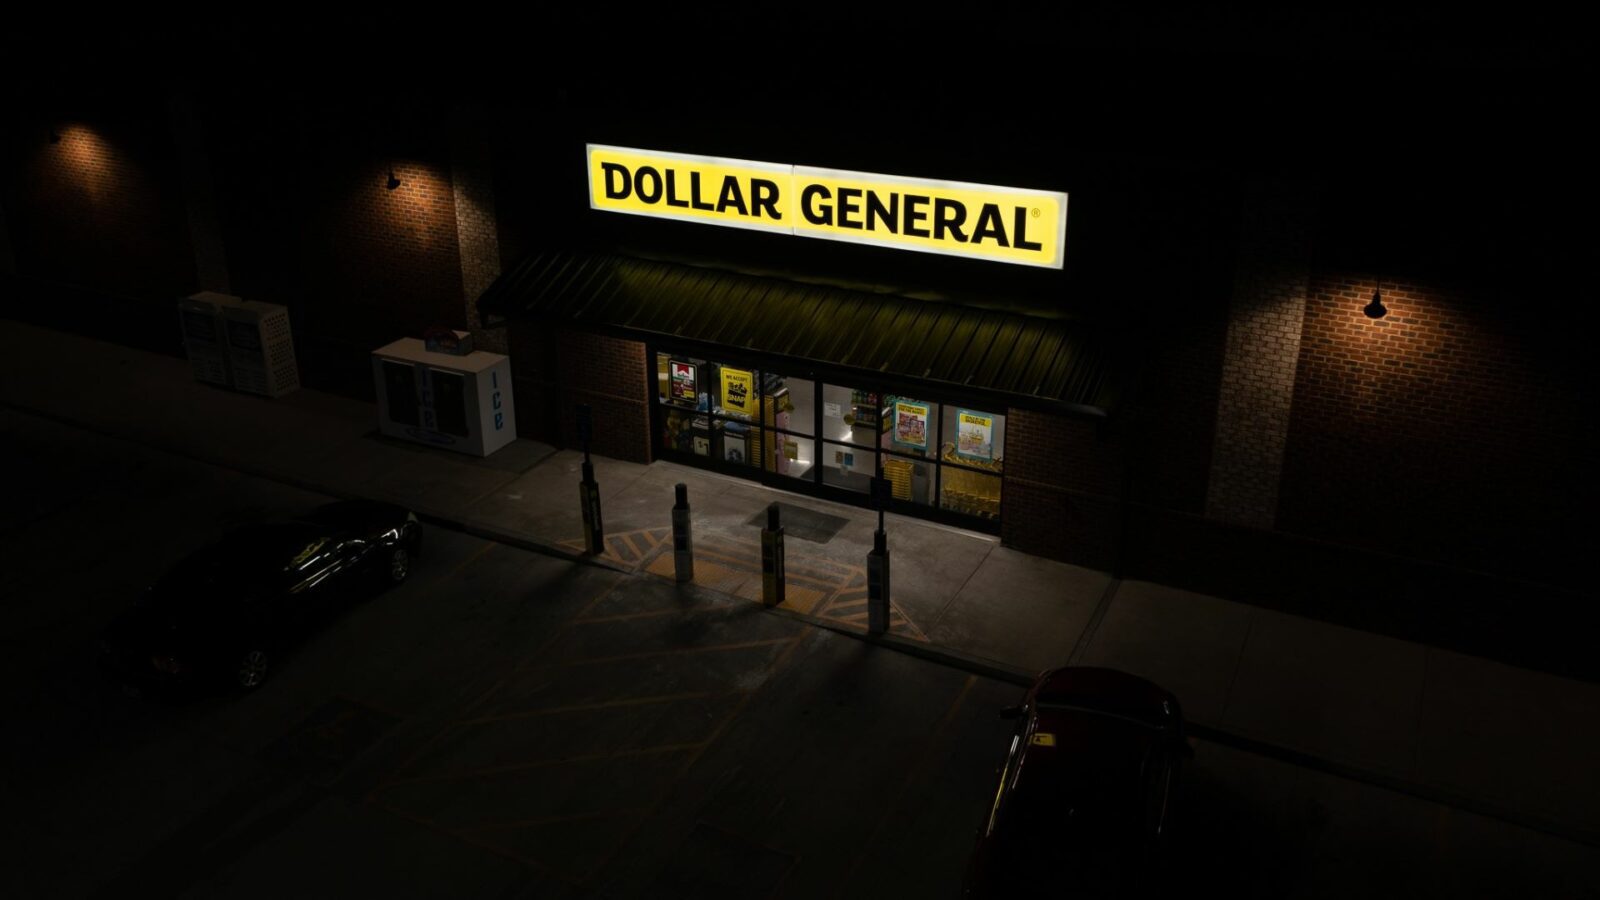 Dollar General parent company faces 321K fine for safety violations at